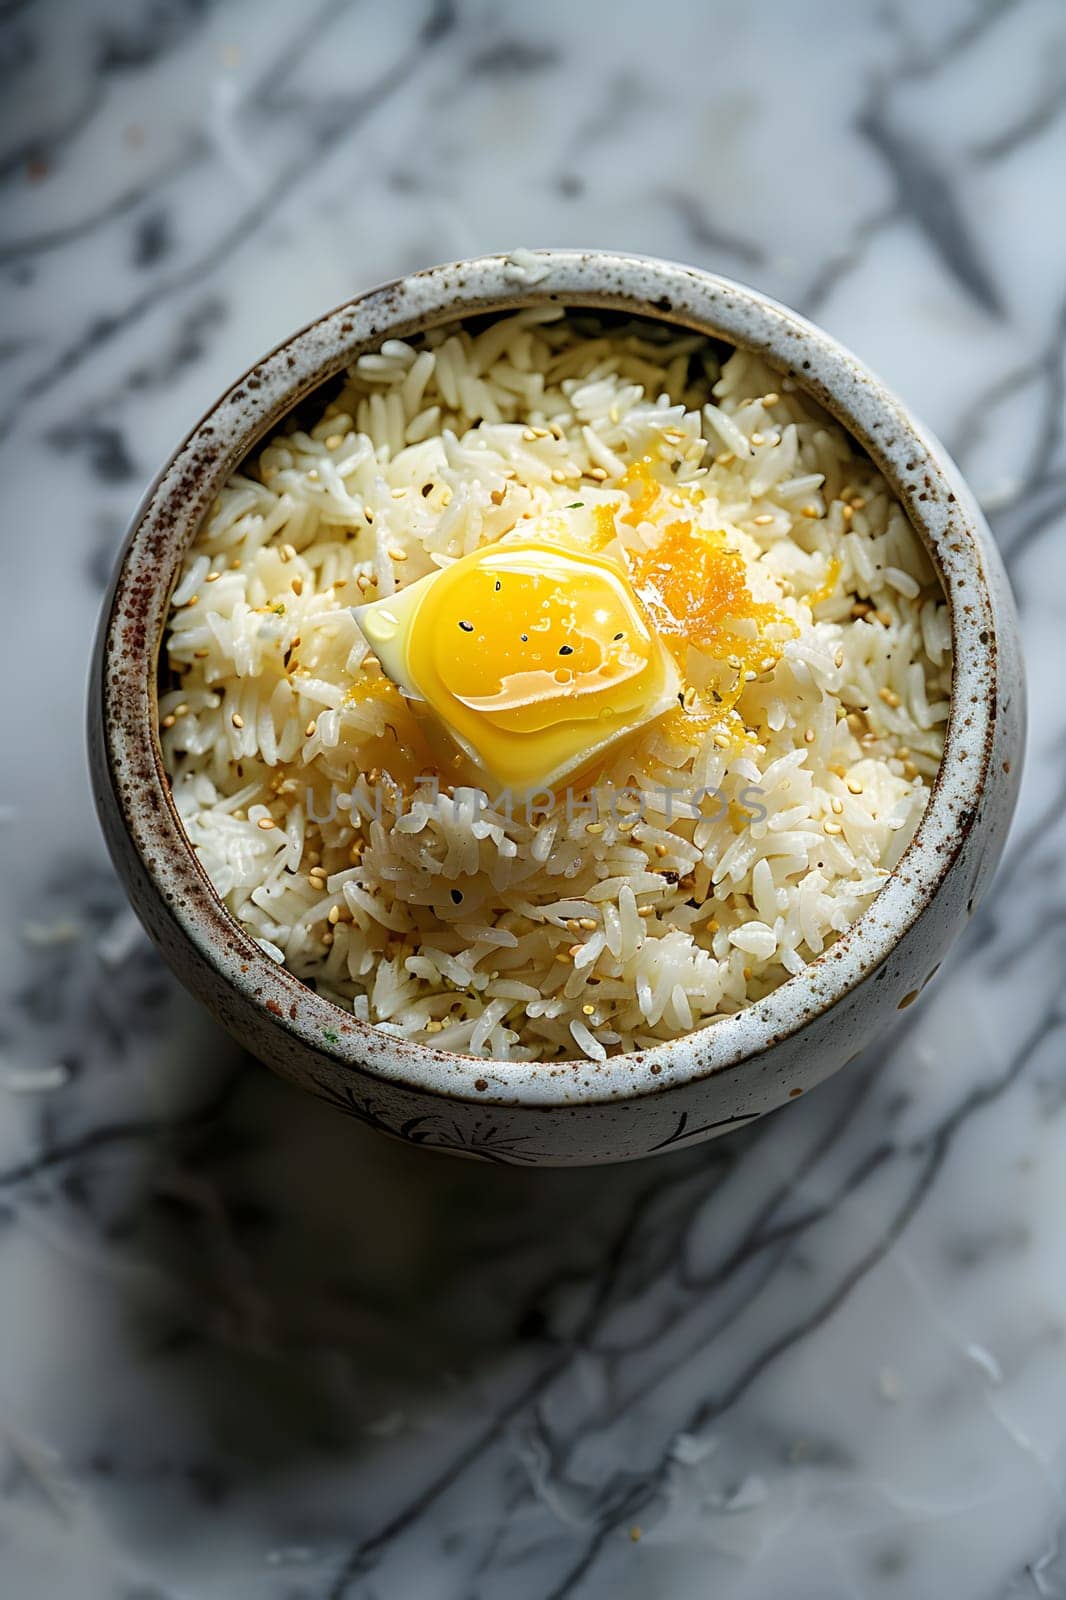 Buttered rice a simple dish with rice and butter as main ingredients by Nadtochiy